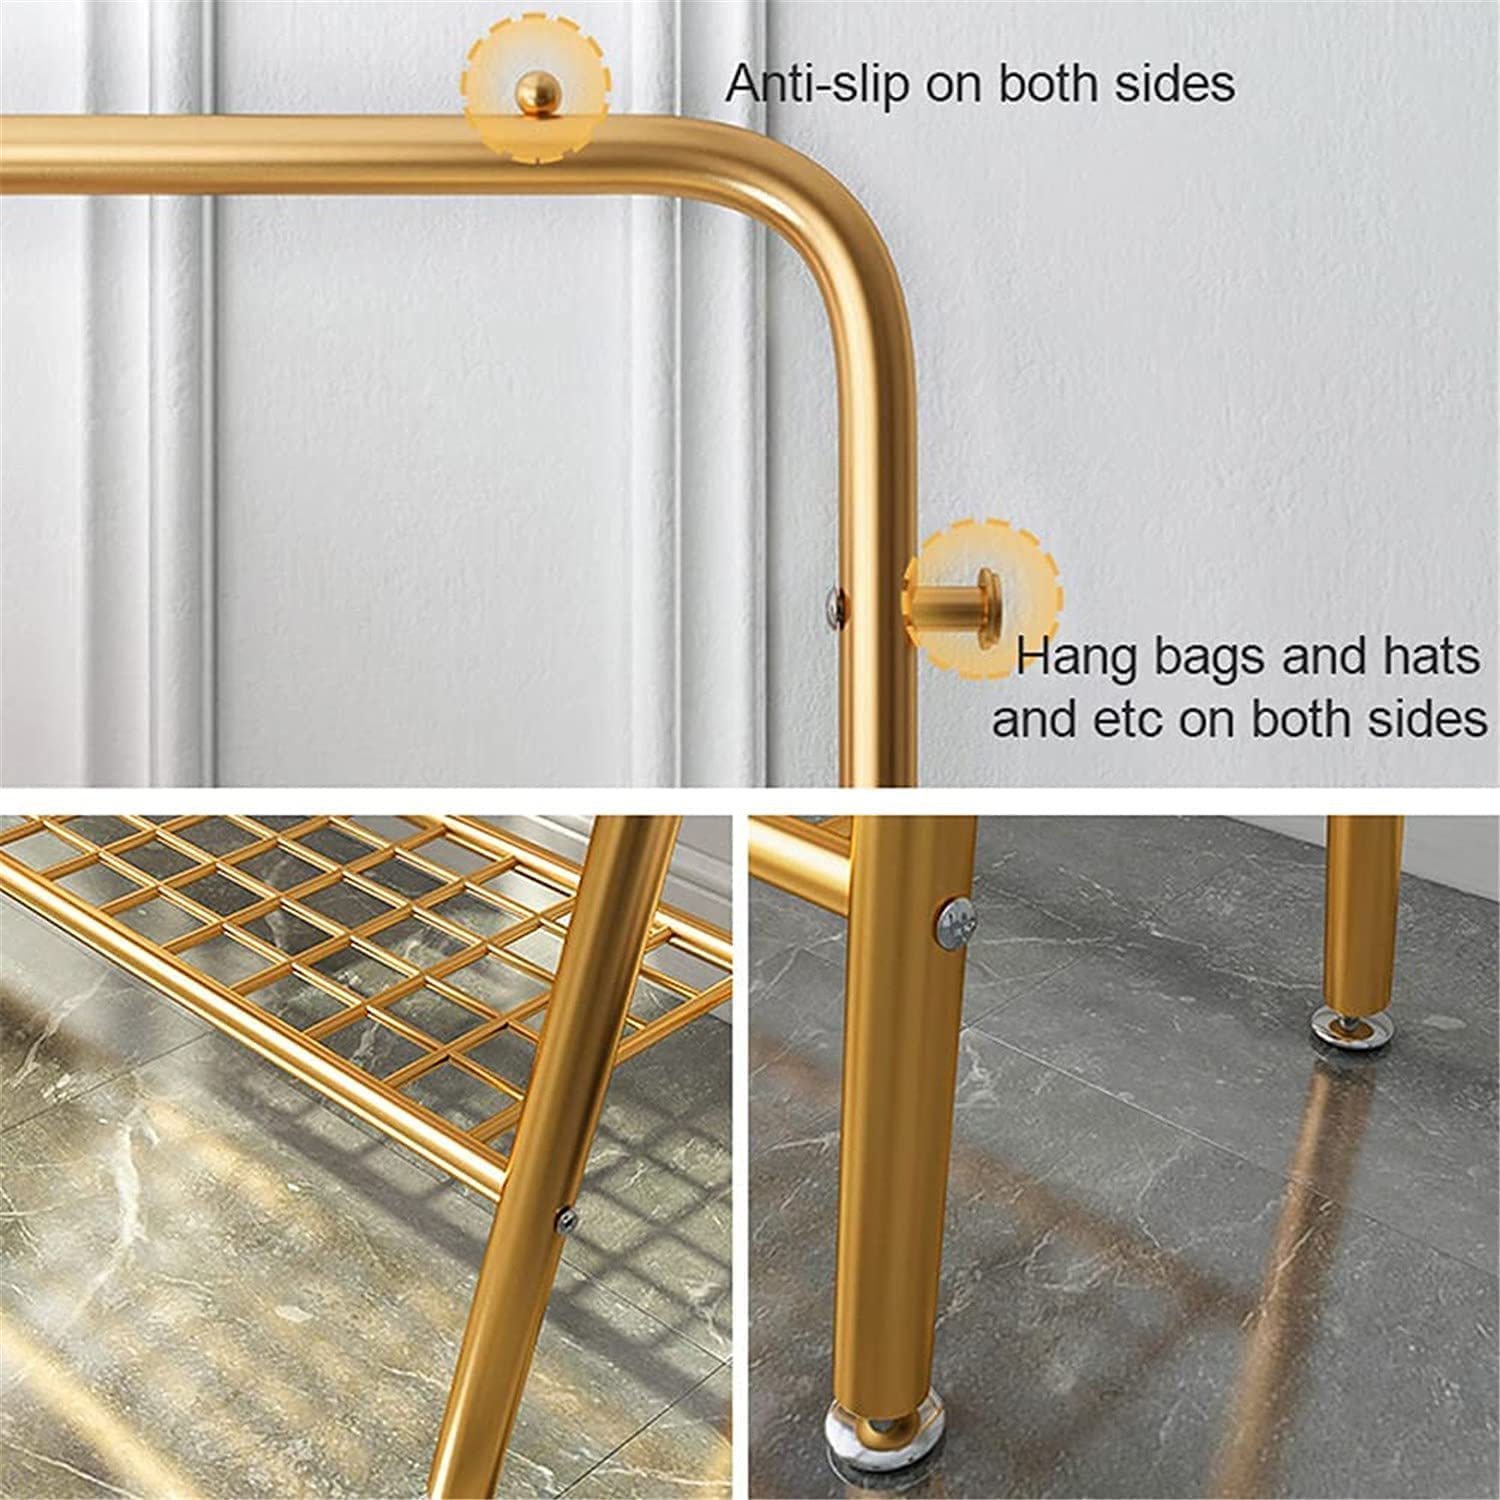 gold clothes rack